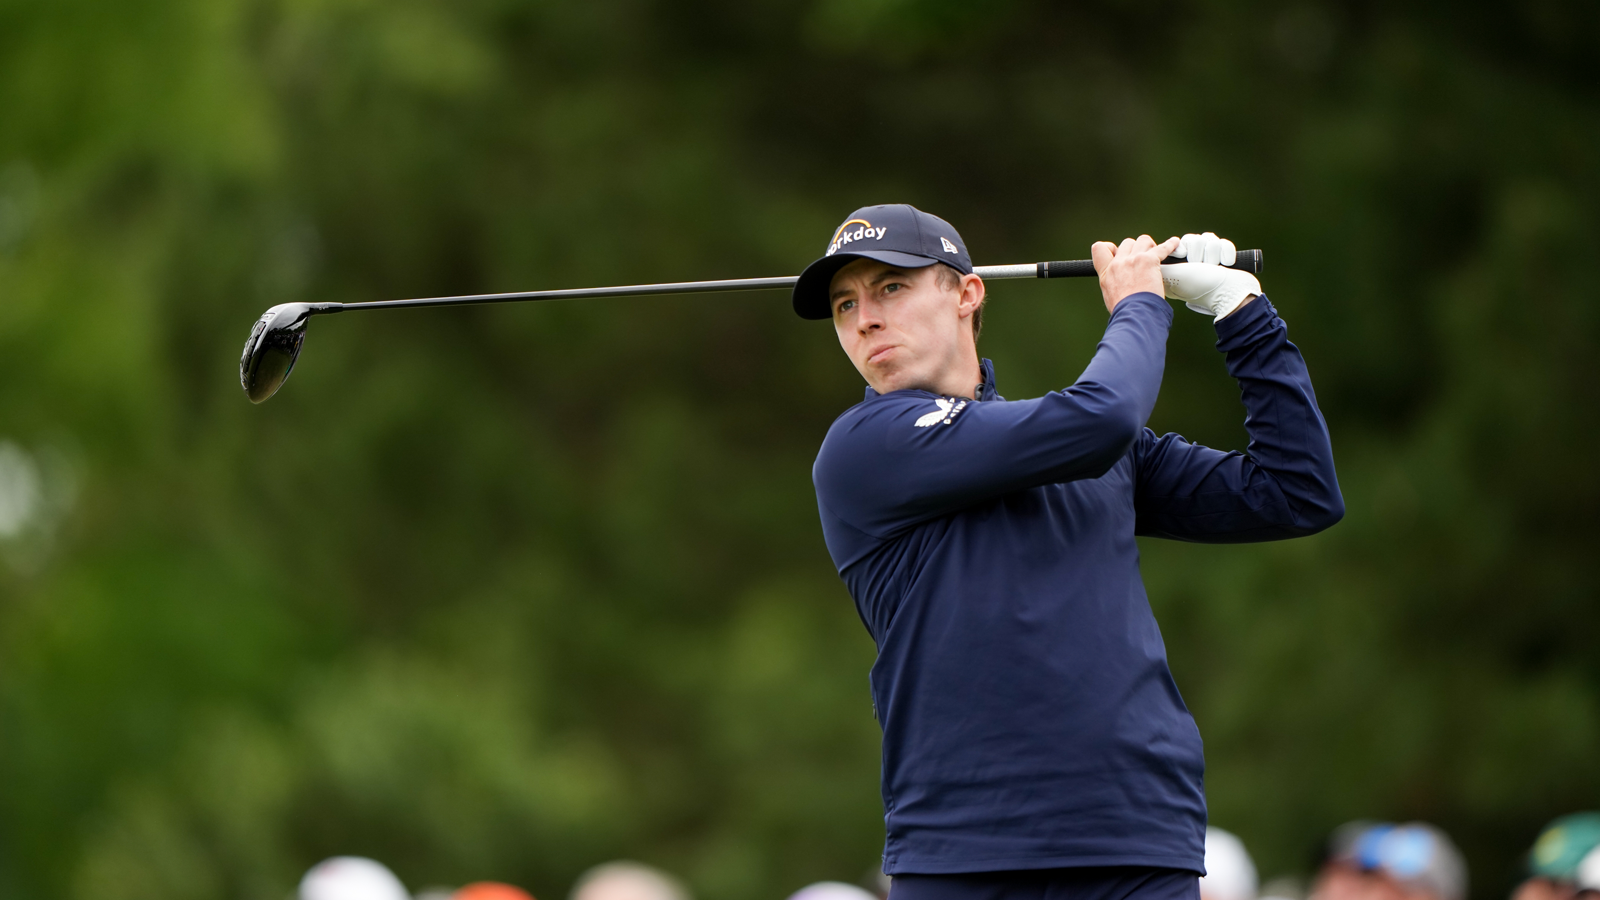 Matt Fitzpatrick of England hits his shot from the seventh tee during the third round of the 2022 PGA Championship